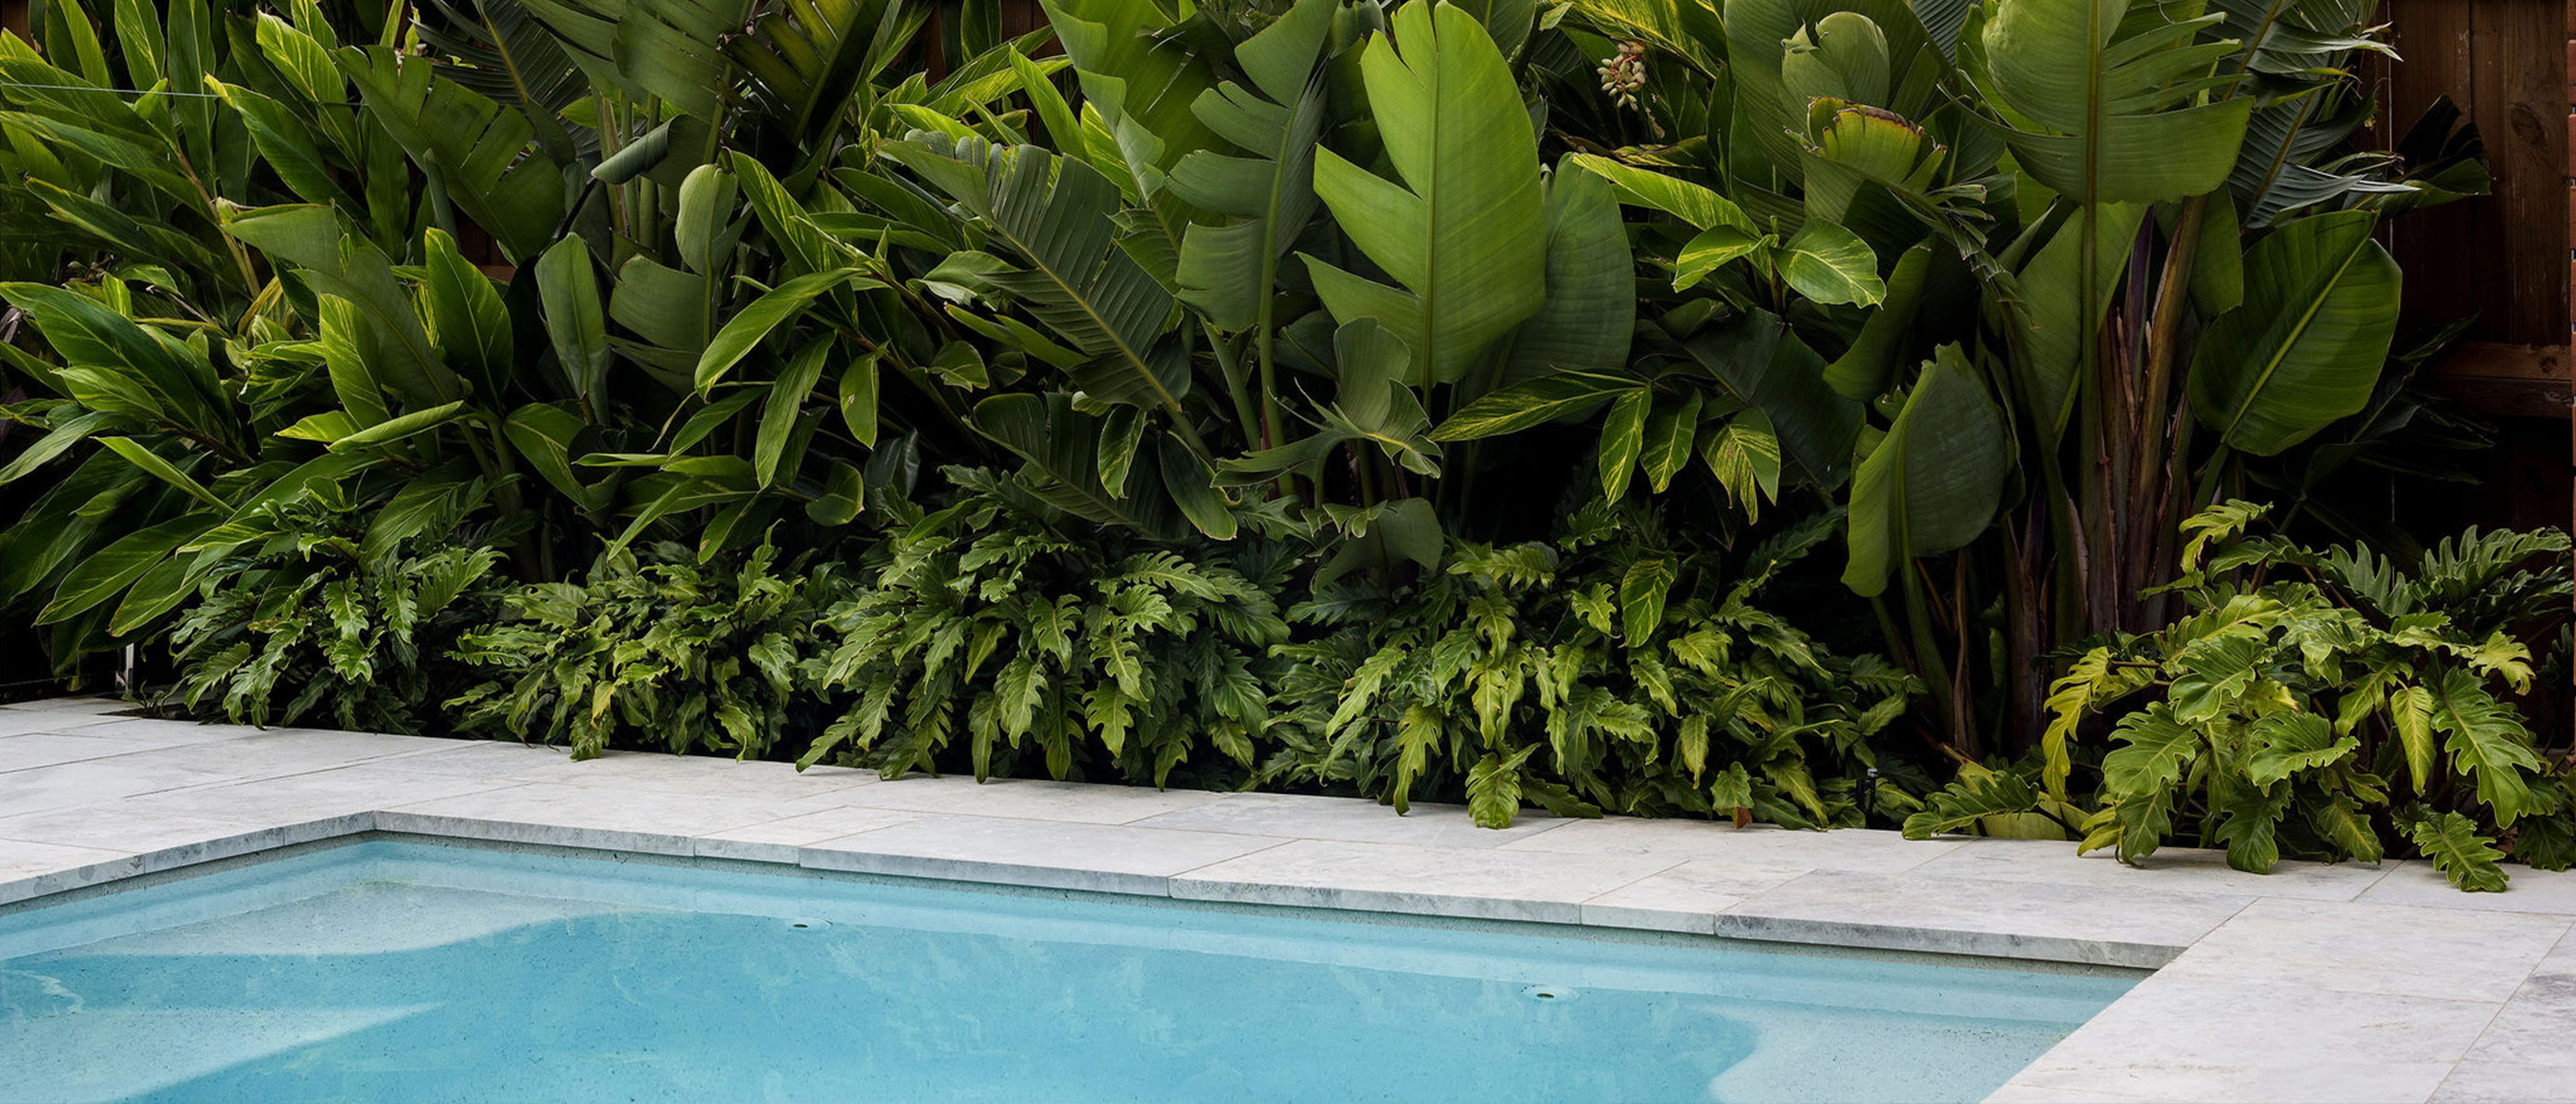 Pool with lush garden bed planted with philodendron Xanadu, ginger and giant bird of paradise